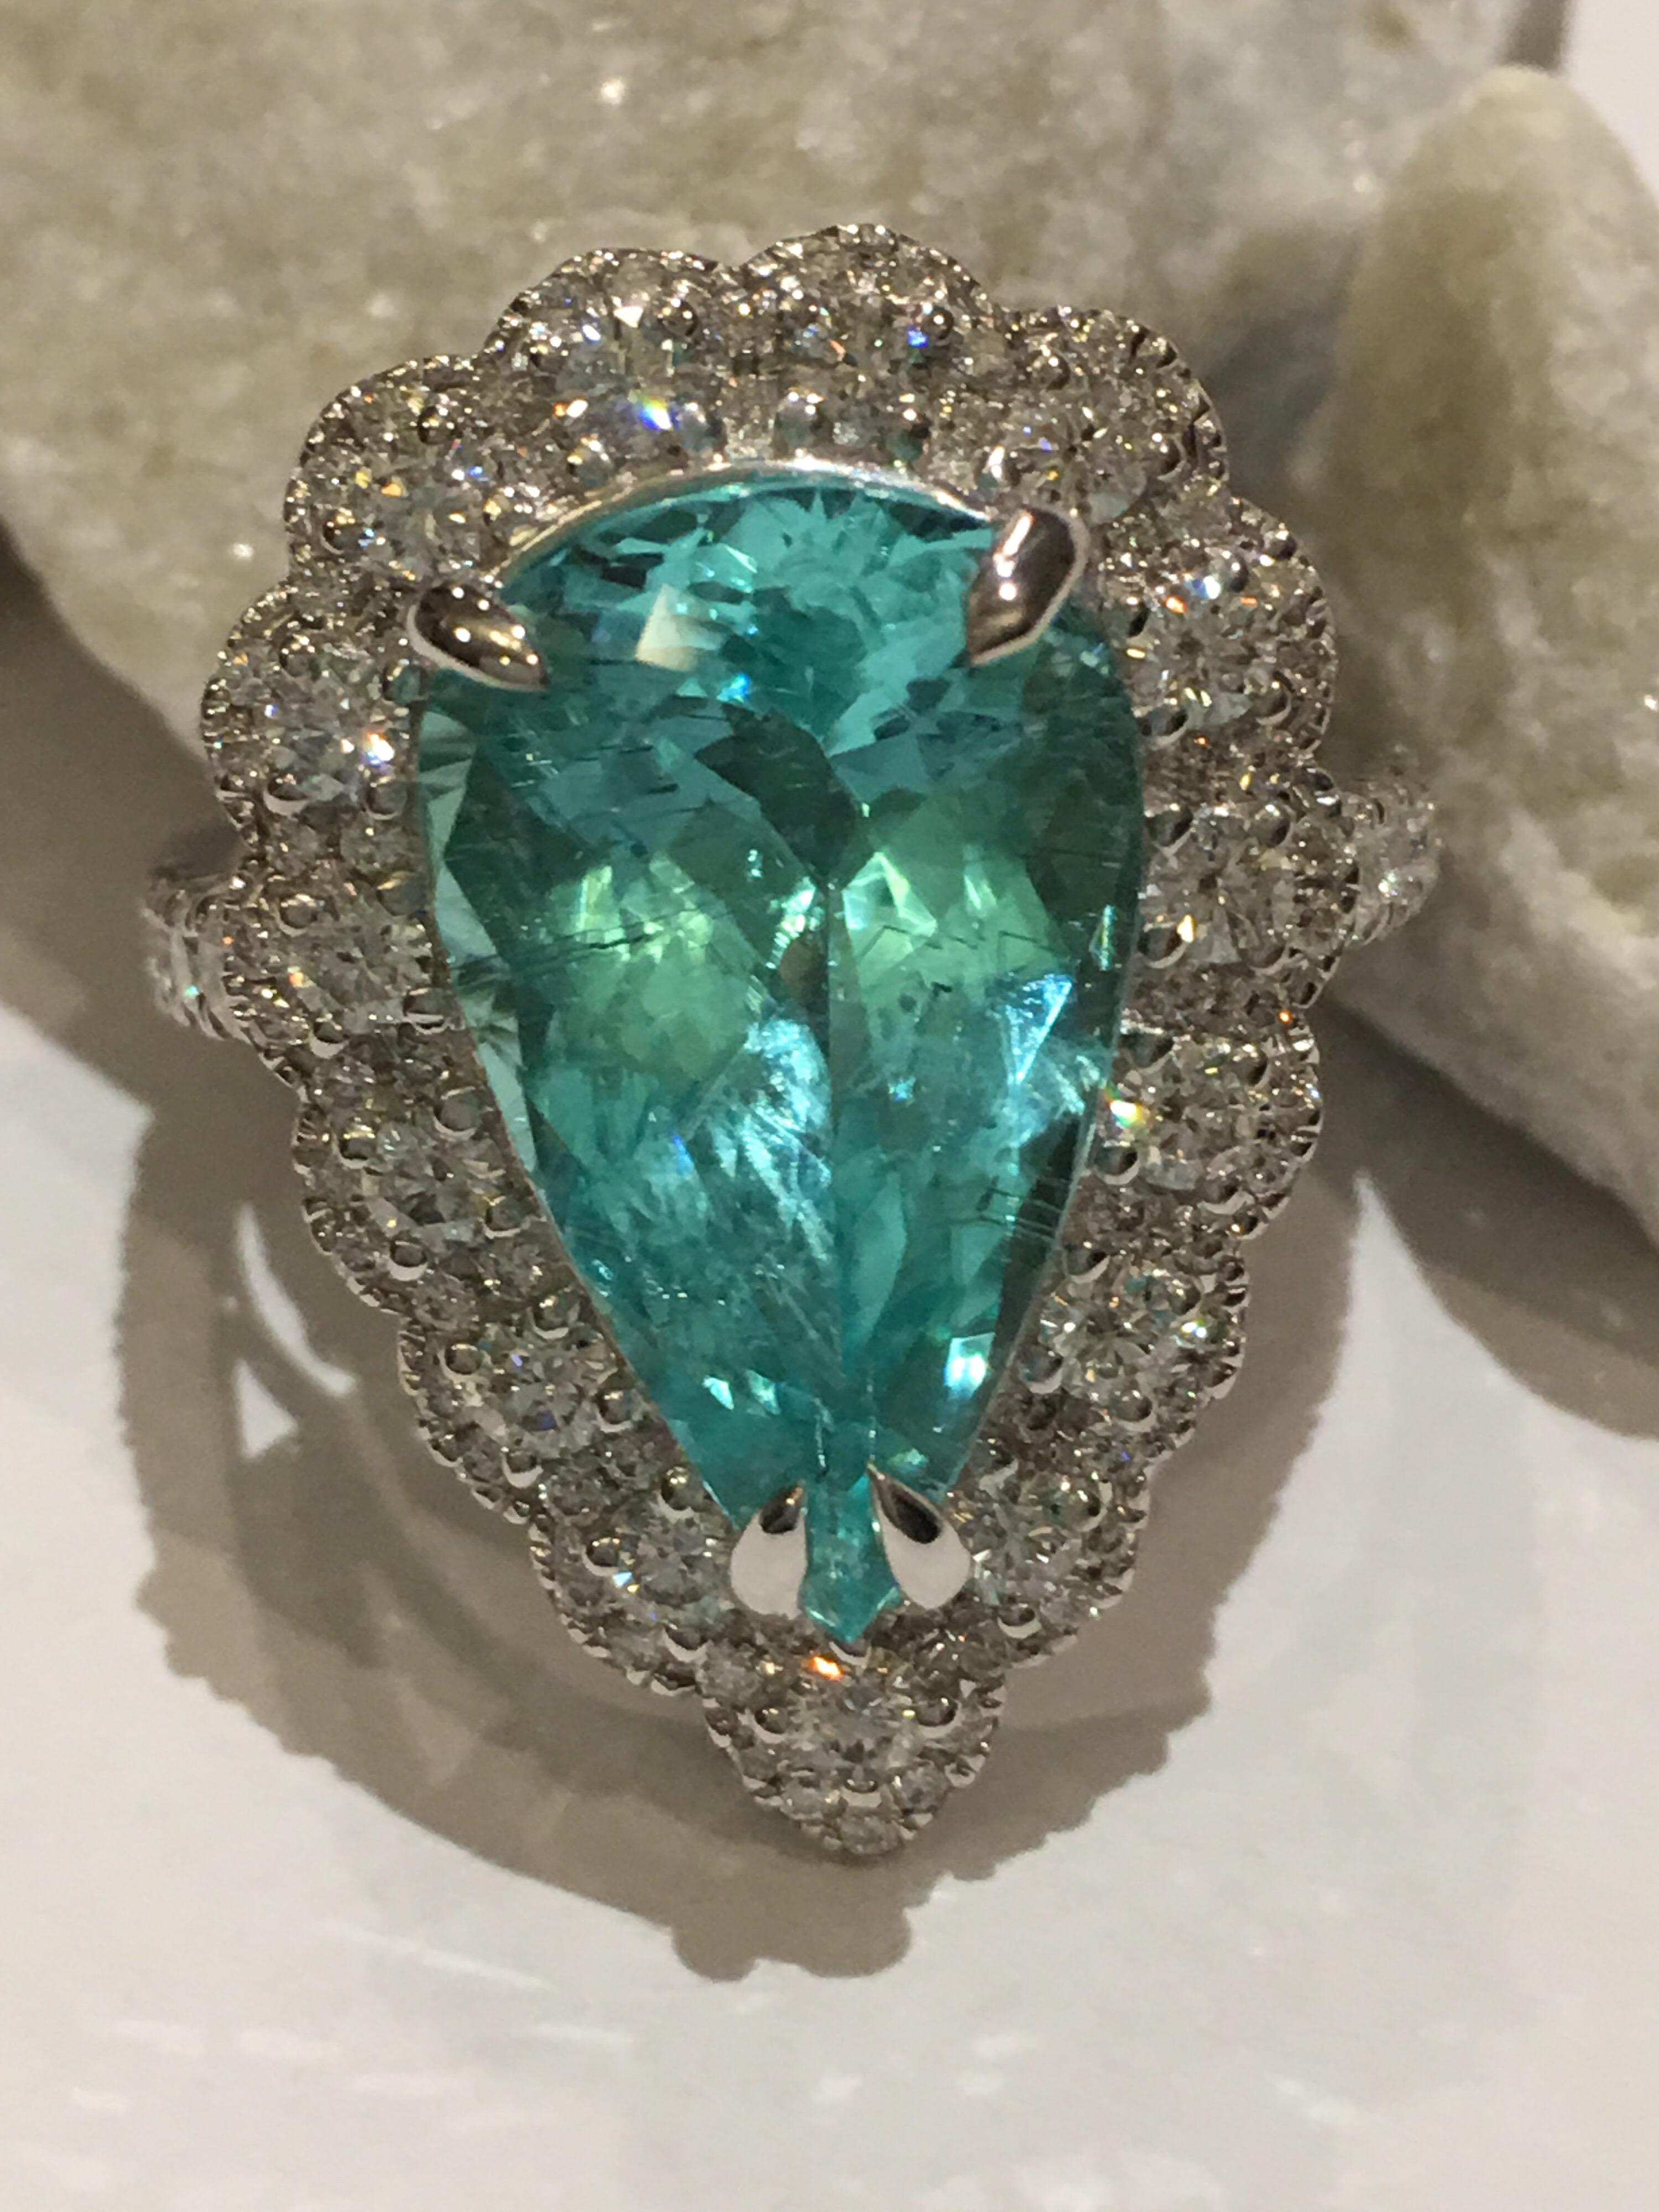 GIA Certified 5.44 Carat Paraiba Tourmaline Diamond Cocktail ring set in 18K White Gold.
White Diamonds total weight is 1.07 Carat.
The Size of the Ring is 7 but can be resized.